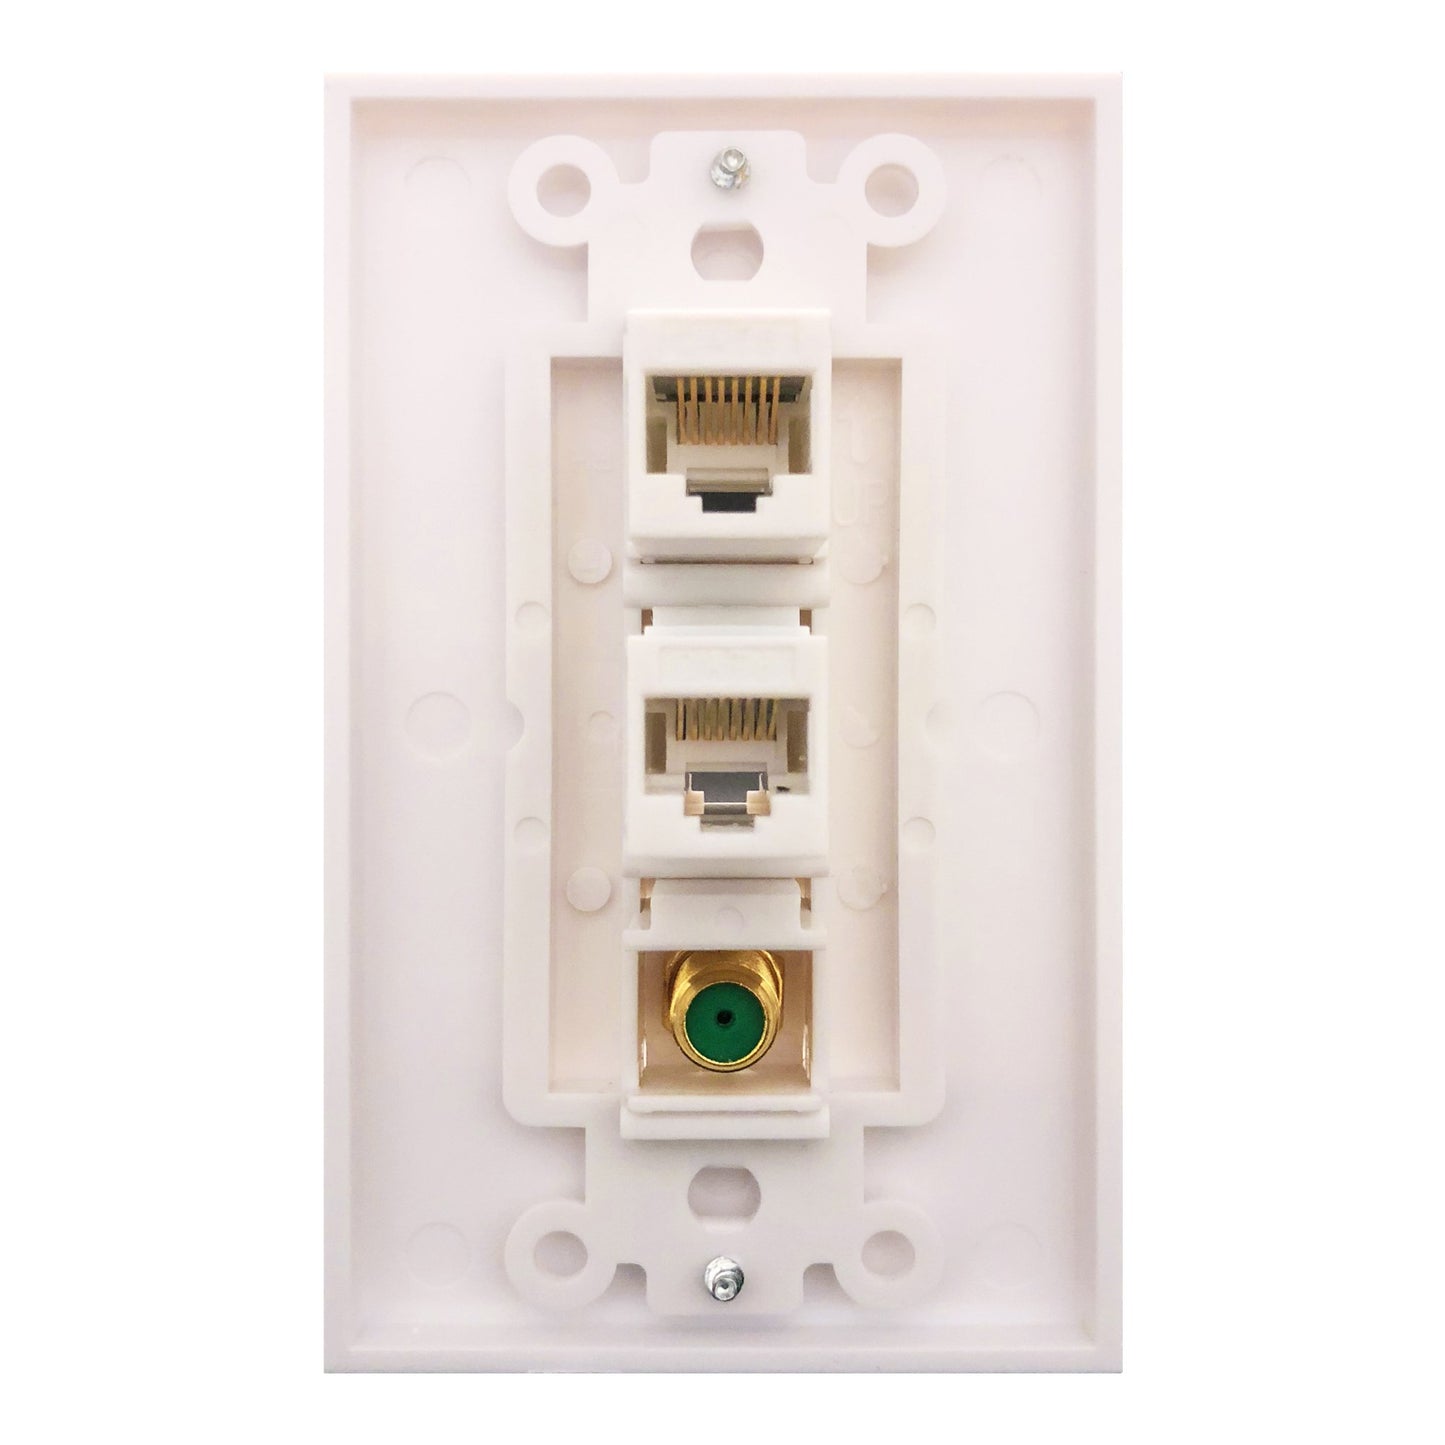 Cat6 Coax 1 Gang Wall Plate with Single Gang Low Voltage Mounting Bracket,Yomyrayhu, 2 x Cat6 Ｆemale to Ｆemale RJ45 Ethernet,1 x 3Ghz Brass Plated with Gold F81 Coax